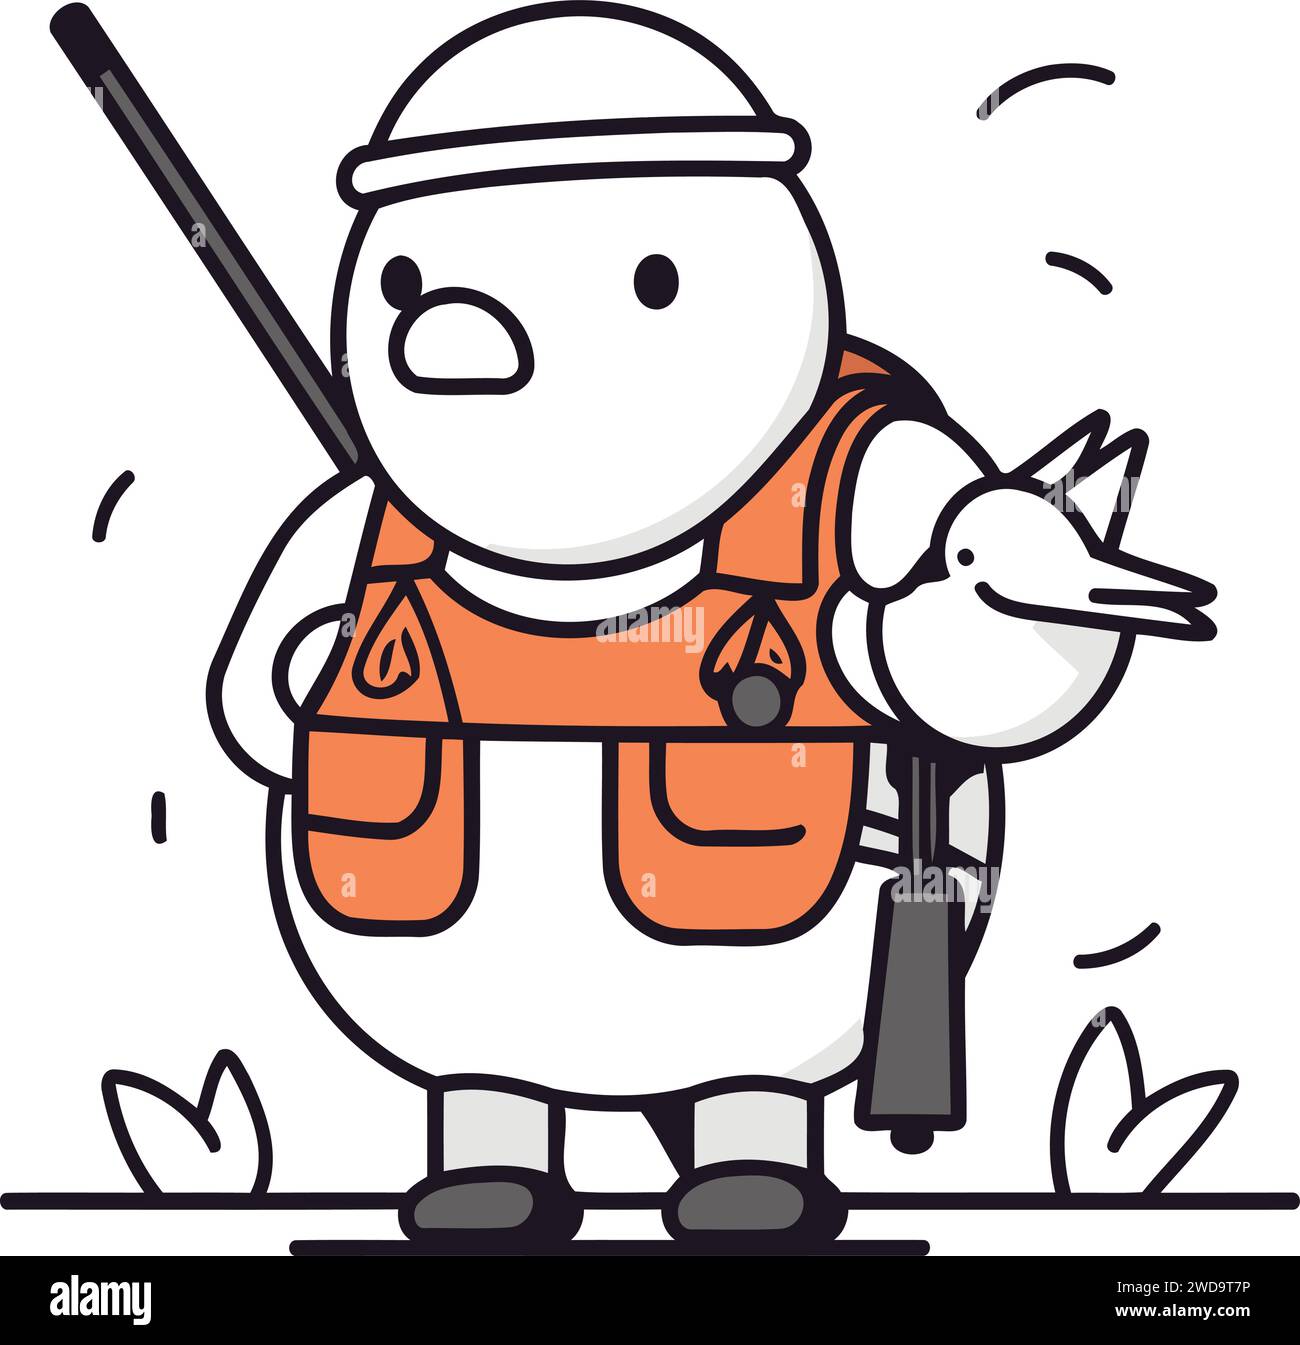 Fisherman with a seagull. Vector line art illustration. Stock Vector